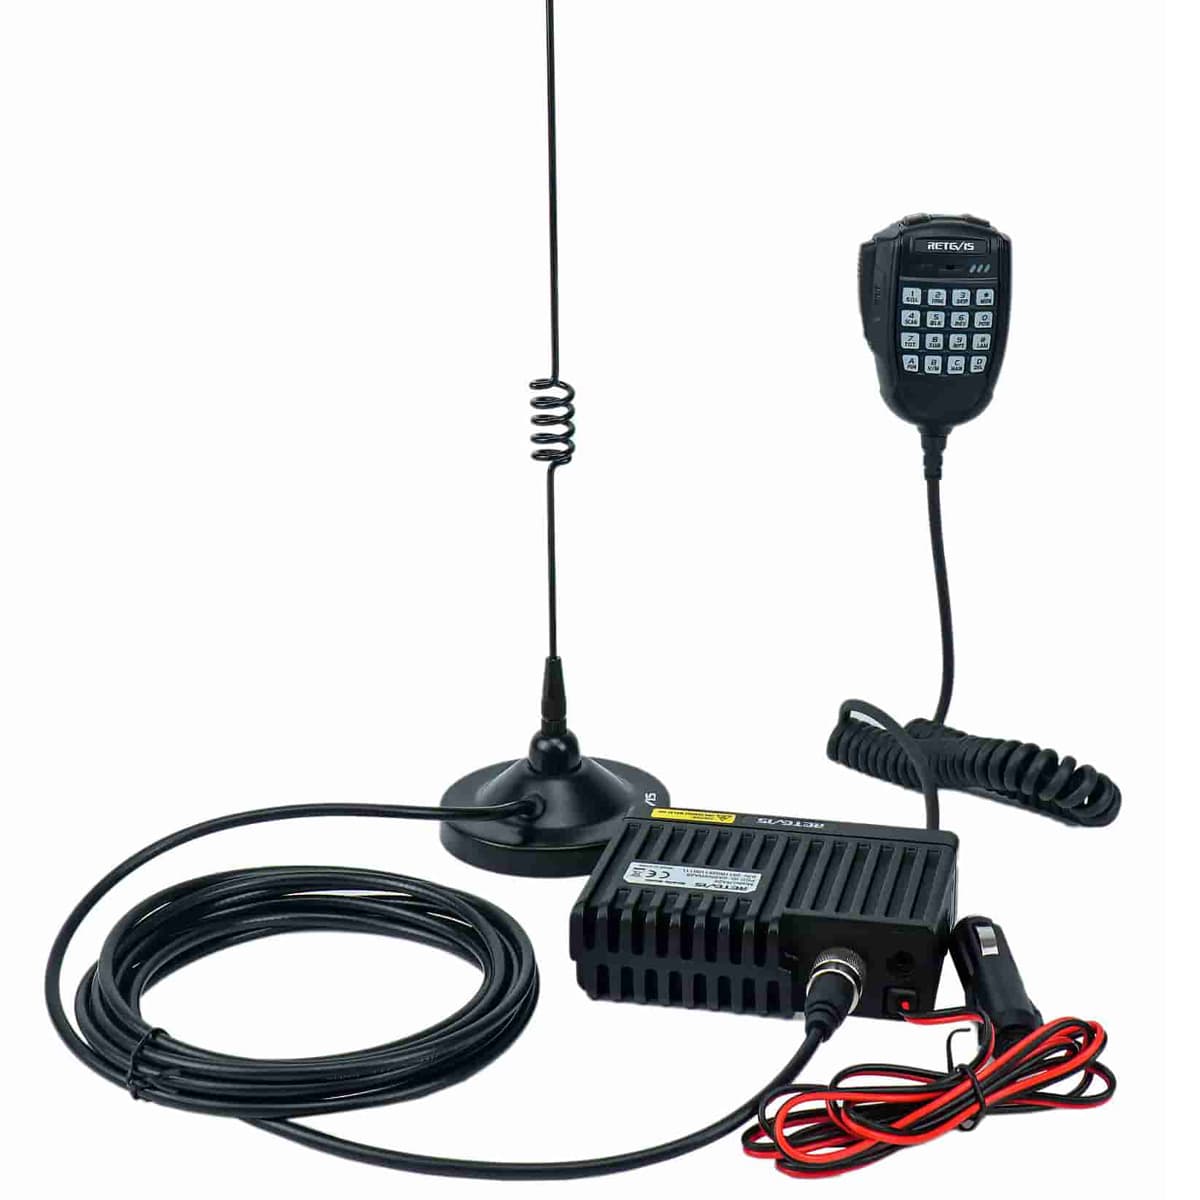 https://www.retevissolutions.com/Assets/ProductImages/A/A9198B-C9058A/GMRS-mobile-car-radio-solution.jpg